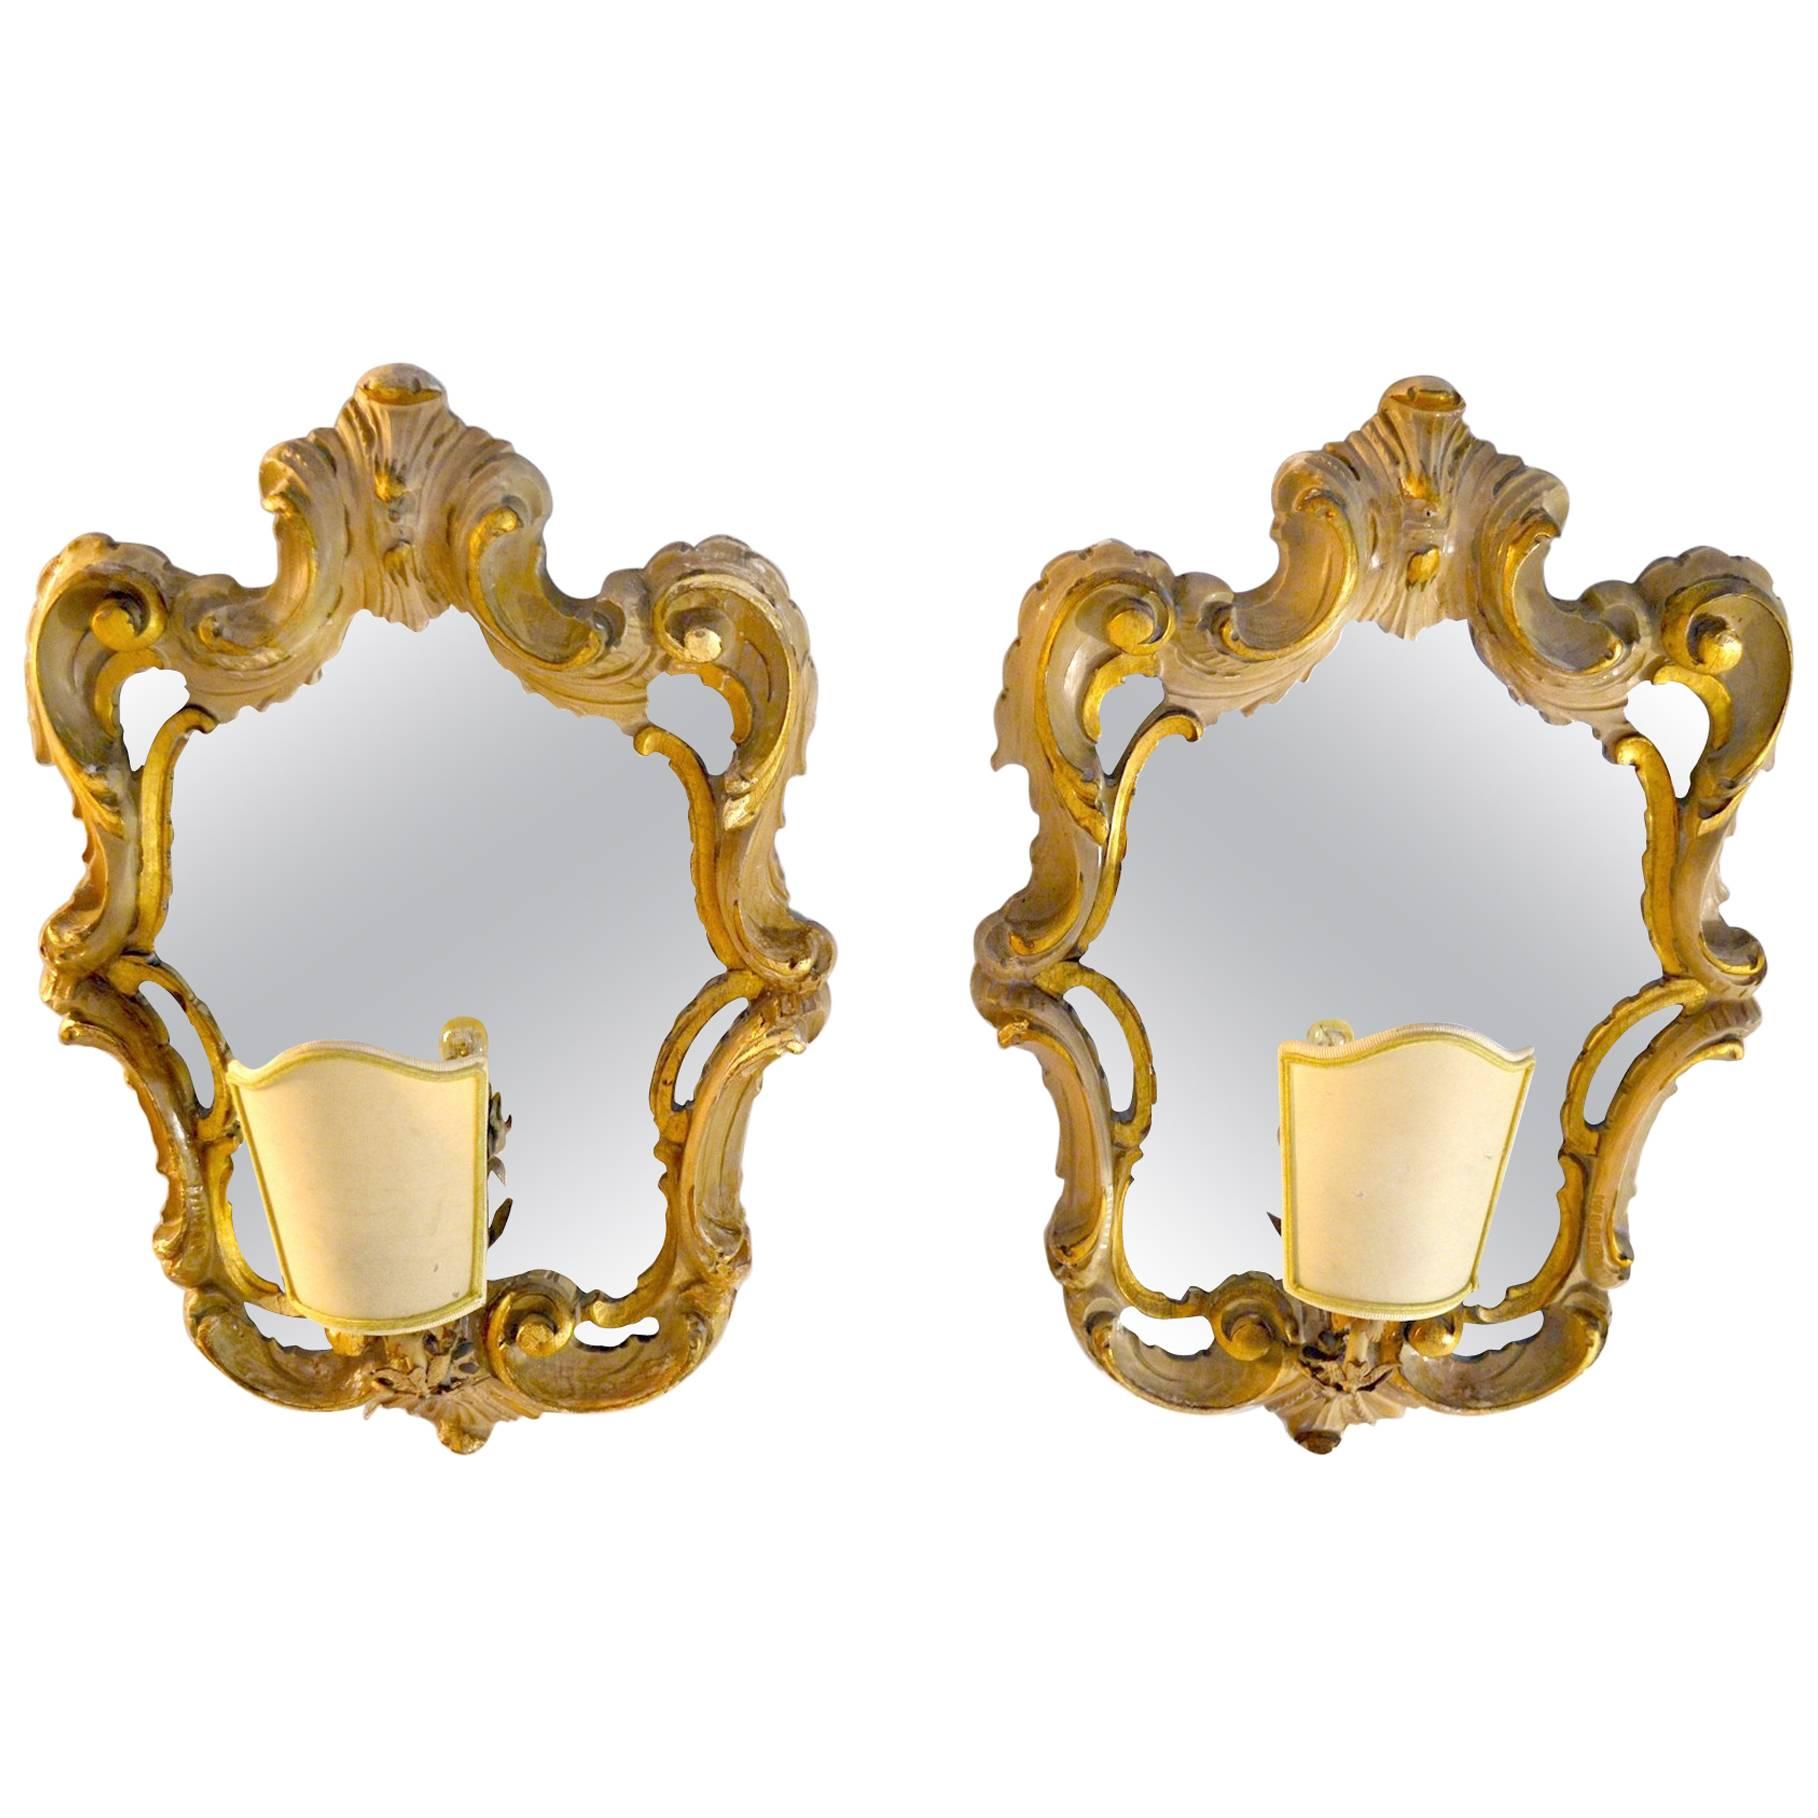 Pair of Rococo Style Mirrored Sconces